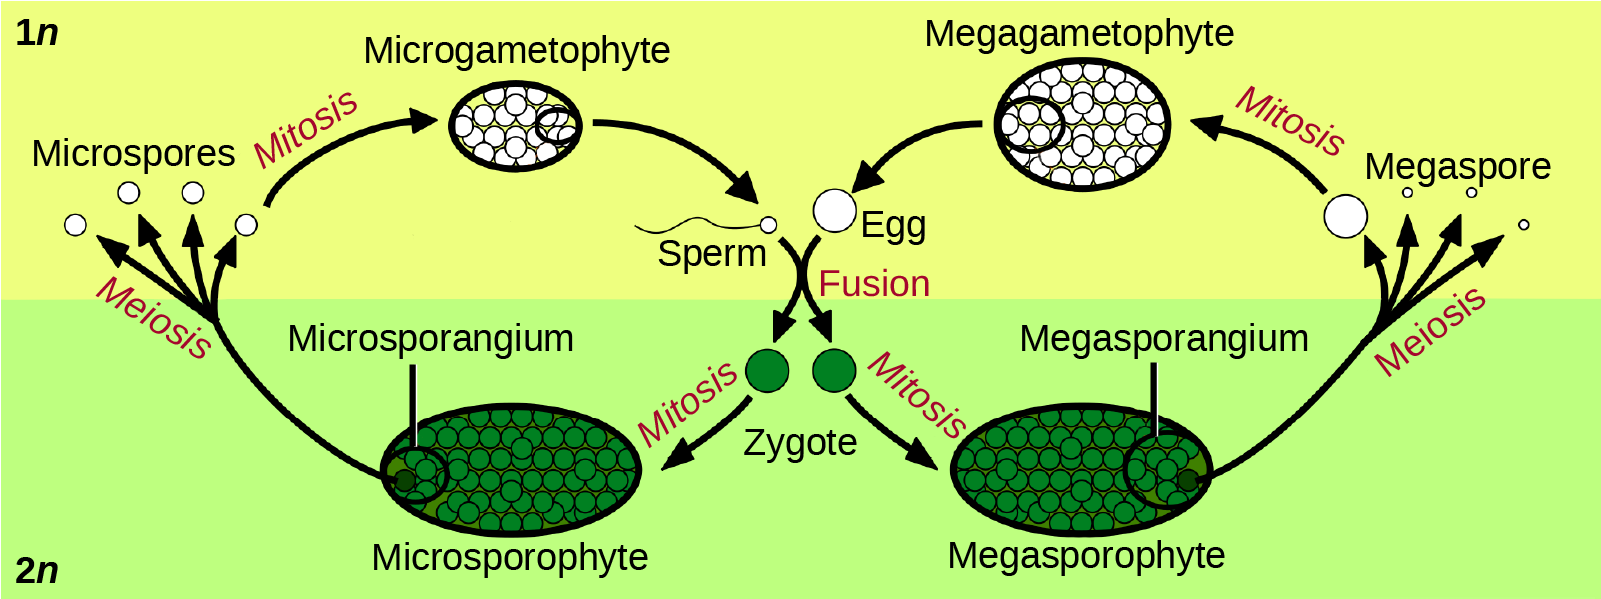 Illustration shows the life cycle of angiosperms, which includes a microgametophyte stage and a megagametophyte stage. The life cycle begins with the fusion of egg and sperm to form a zygote. The zygote undergoes mitosis, resulting in a male microsporophyte or a female megasporophyte. The microsporophyte has a cluster of cells called a microsporangium, and the megasporophyte has a cluster of cells called a megasporangium. Through meiosis, the microsporangium forms microspores, and the megasporangium forms megaspores. Both microspores and megaspores undergo mitosis, forming the microgametophyte and megagametophyte, respectively. Within the microgametophyte, the fusion of egg and sperm completes the cycle.